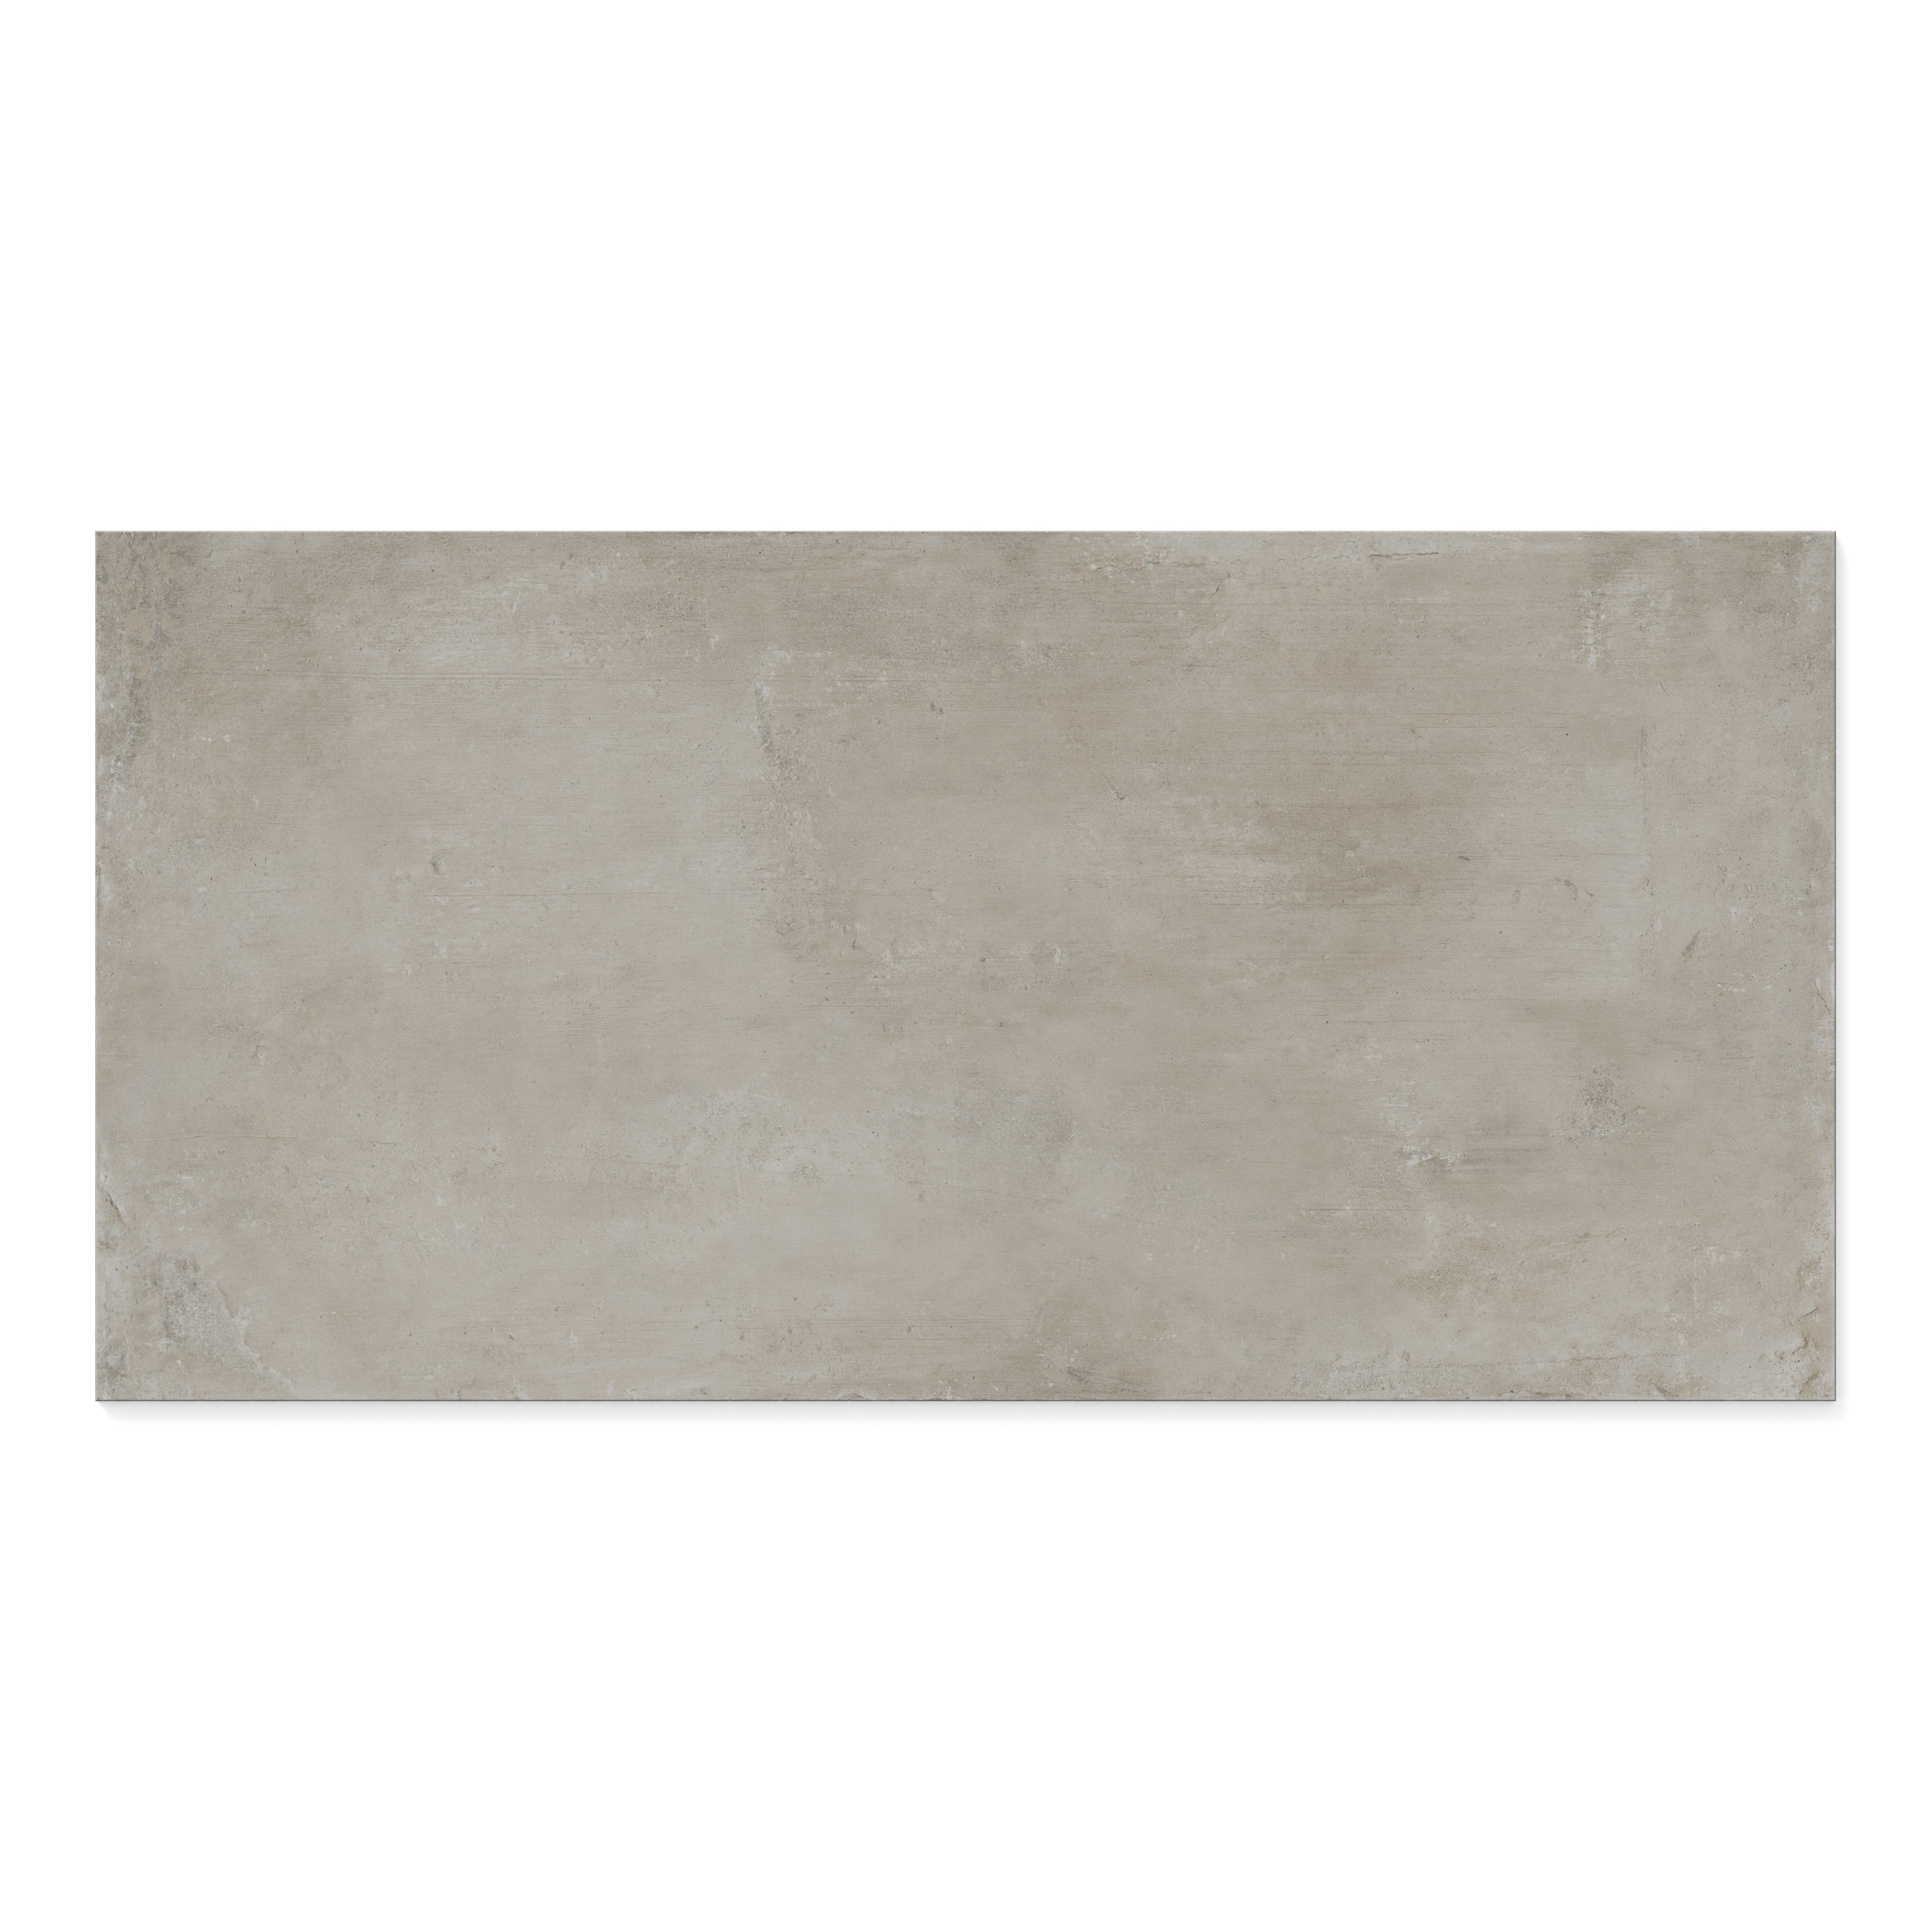 Ramsey 24x48 Matte Porcelain Tile in Putty